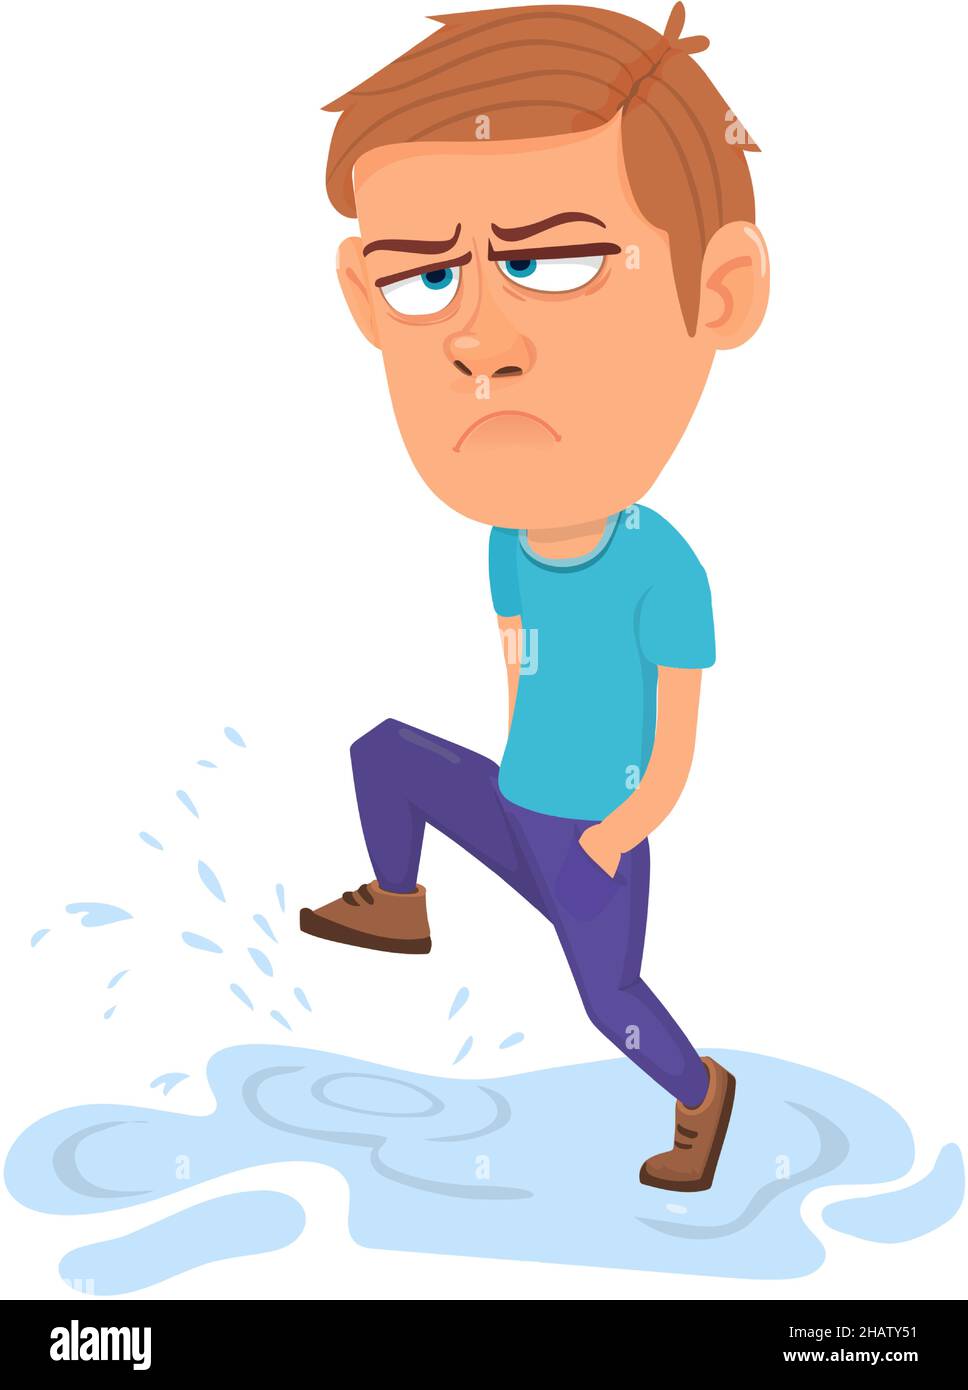 Angry kid walking in puddle. Children bad behavior Stock Vector